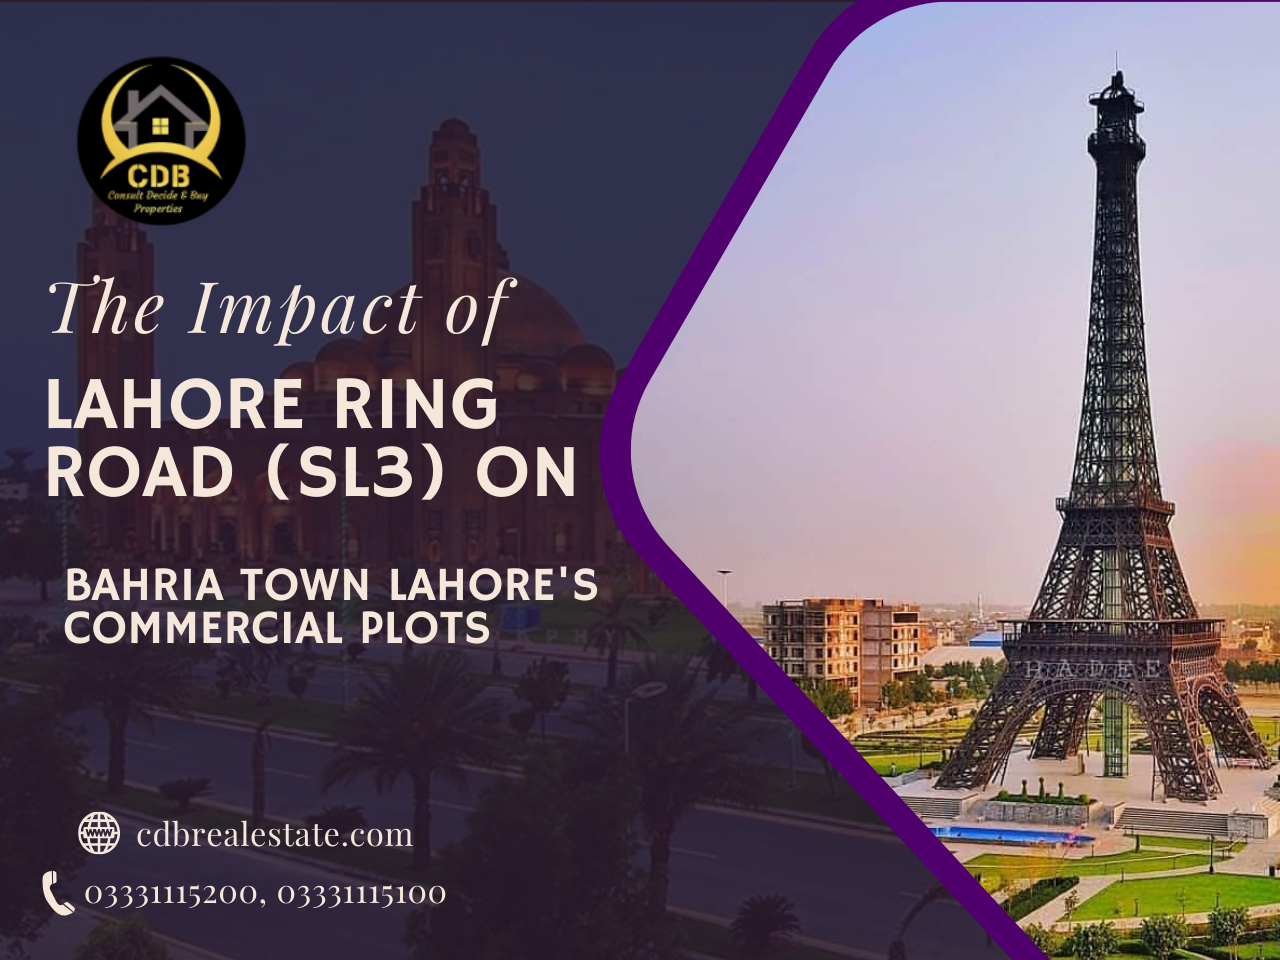 The Impact of Lahore Ring Road (SL3) on Bahria Town Lahore's Commercial Plots